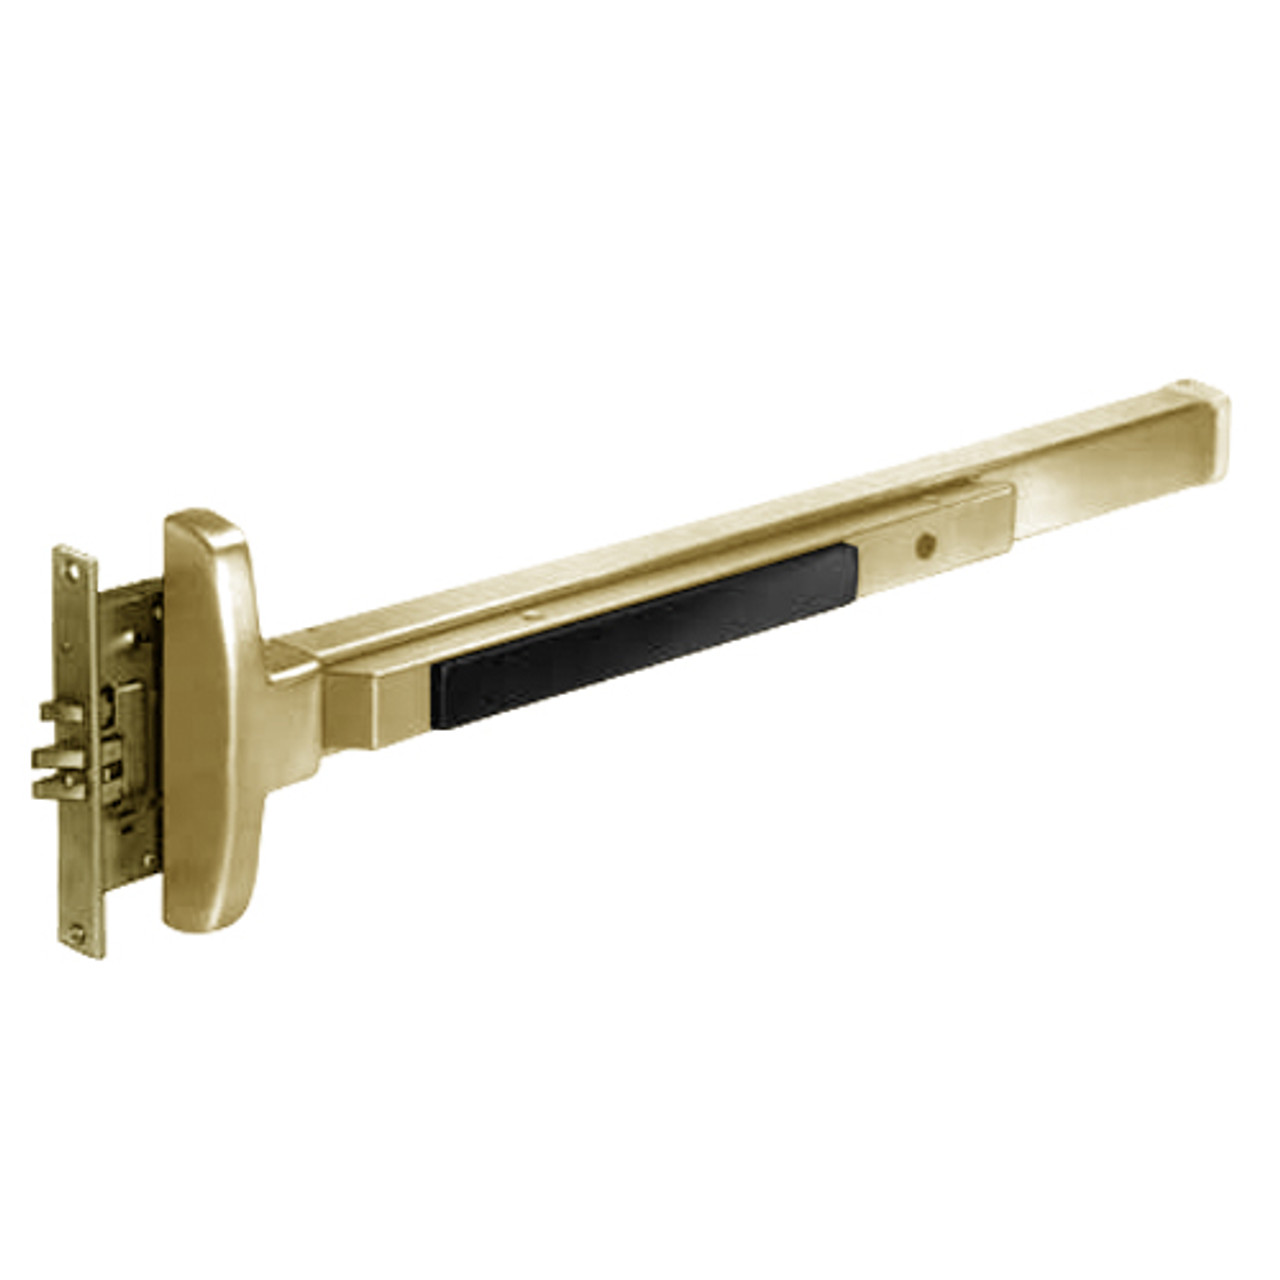 8310G-RHR-03 Sargent 80 Series Exit Only Narrow Stile Mortise Lock Exit Device in Bright Brass